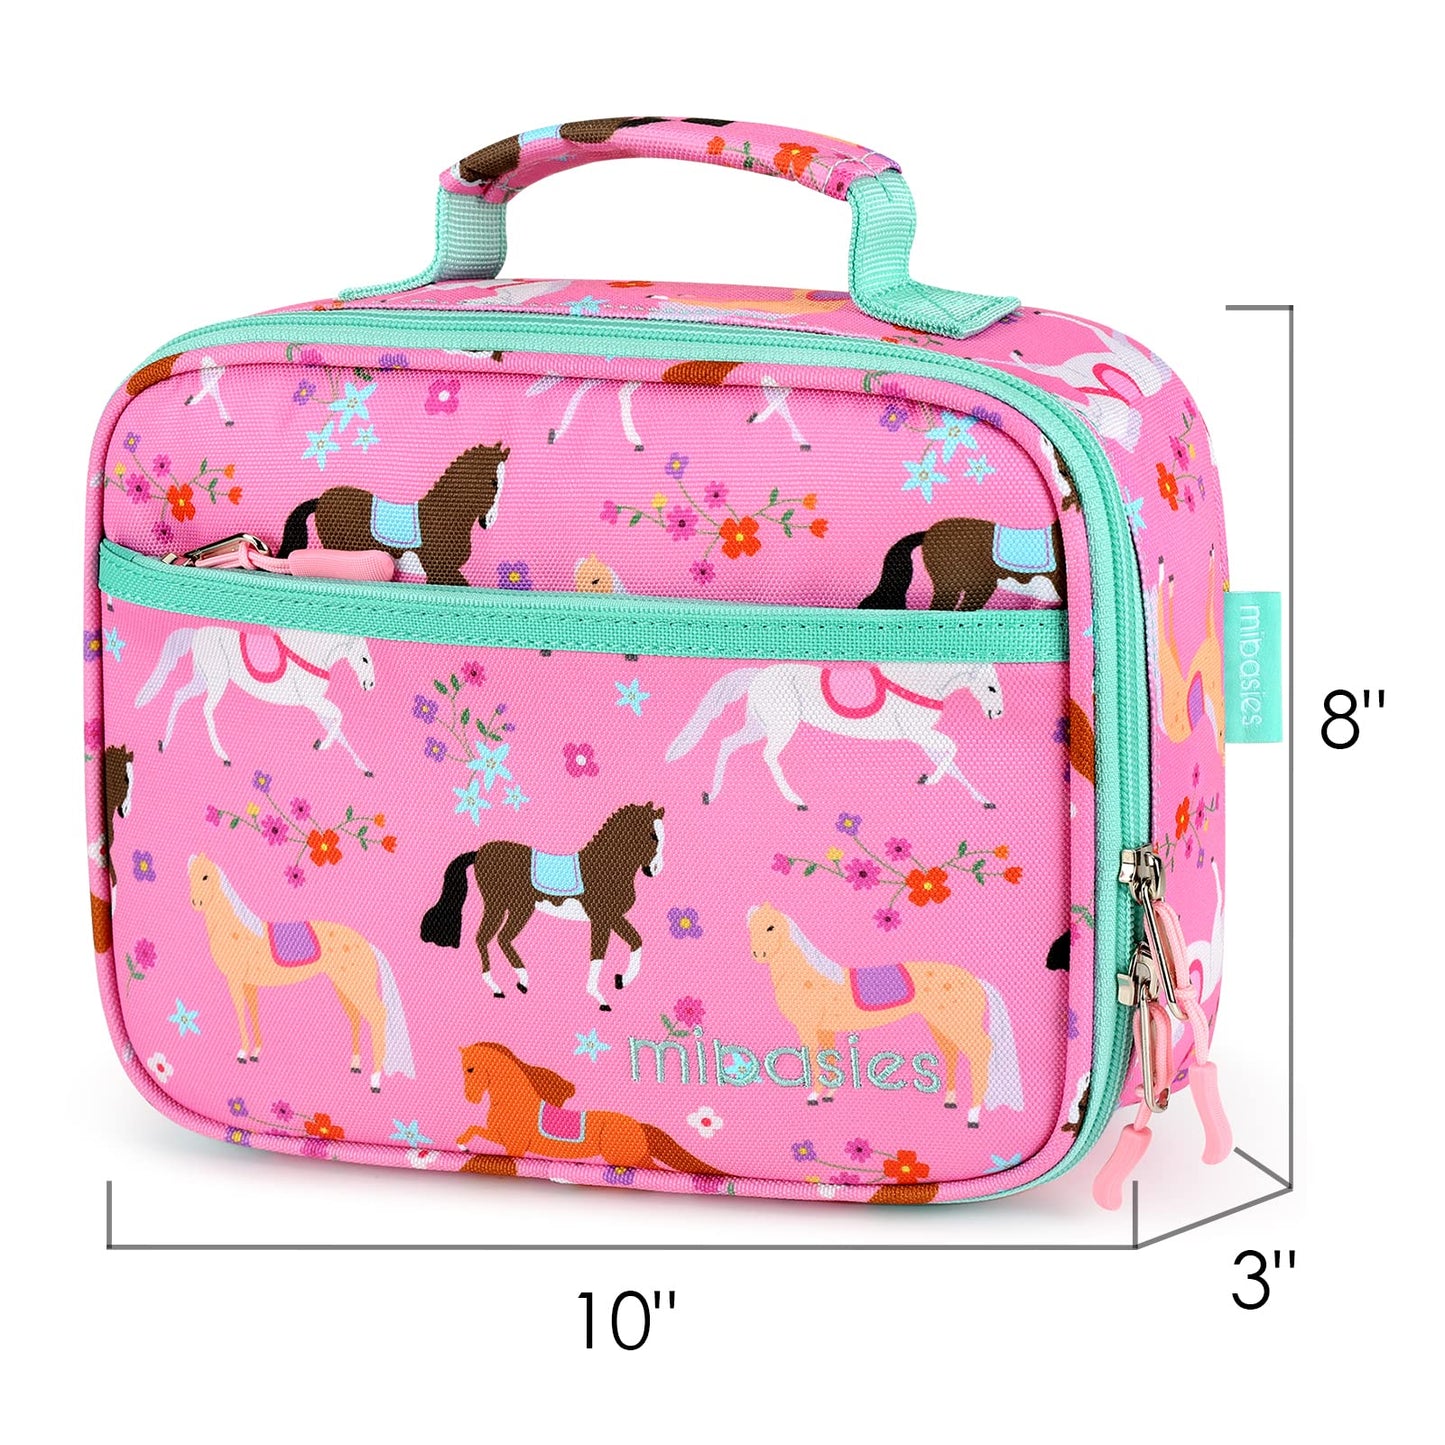 FUN FOR SPRING Lunch Bag